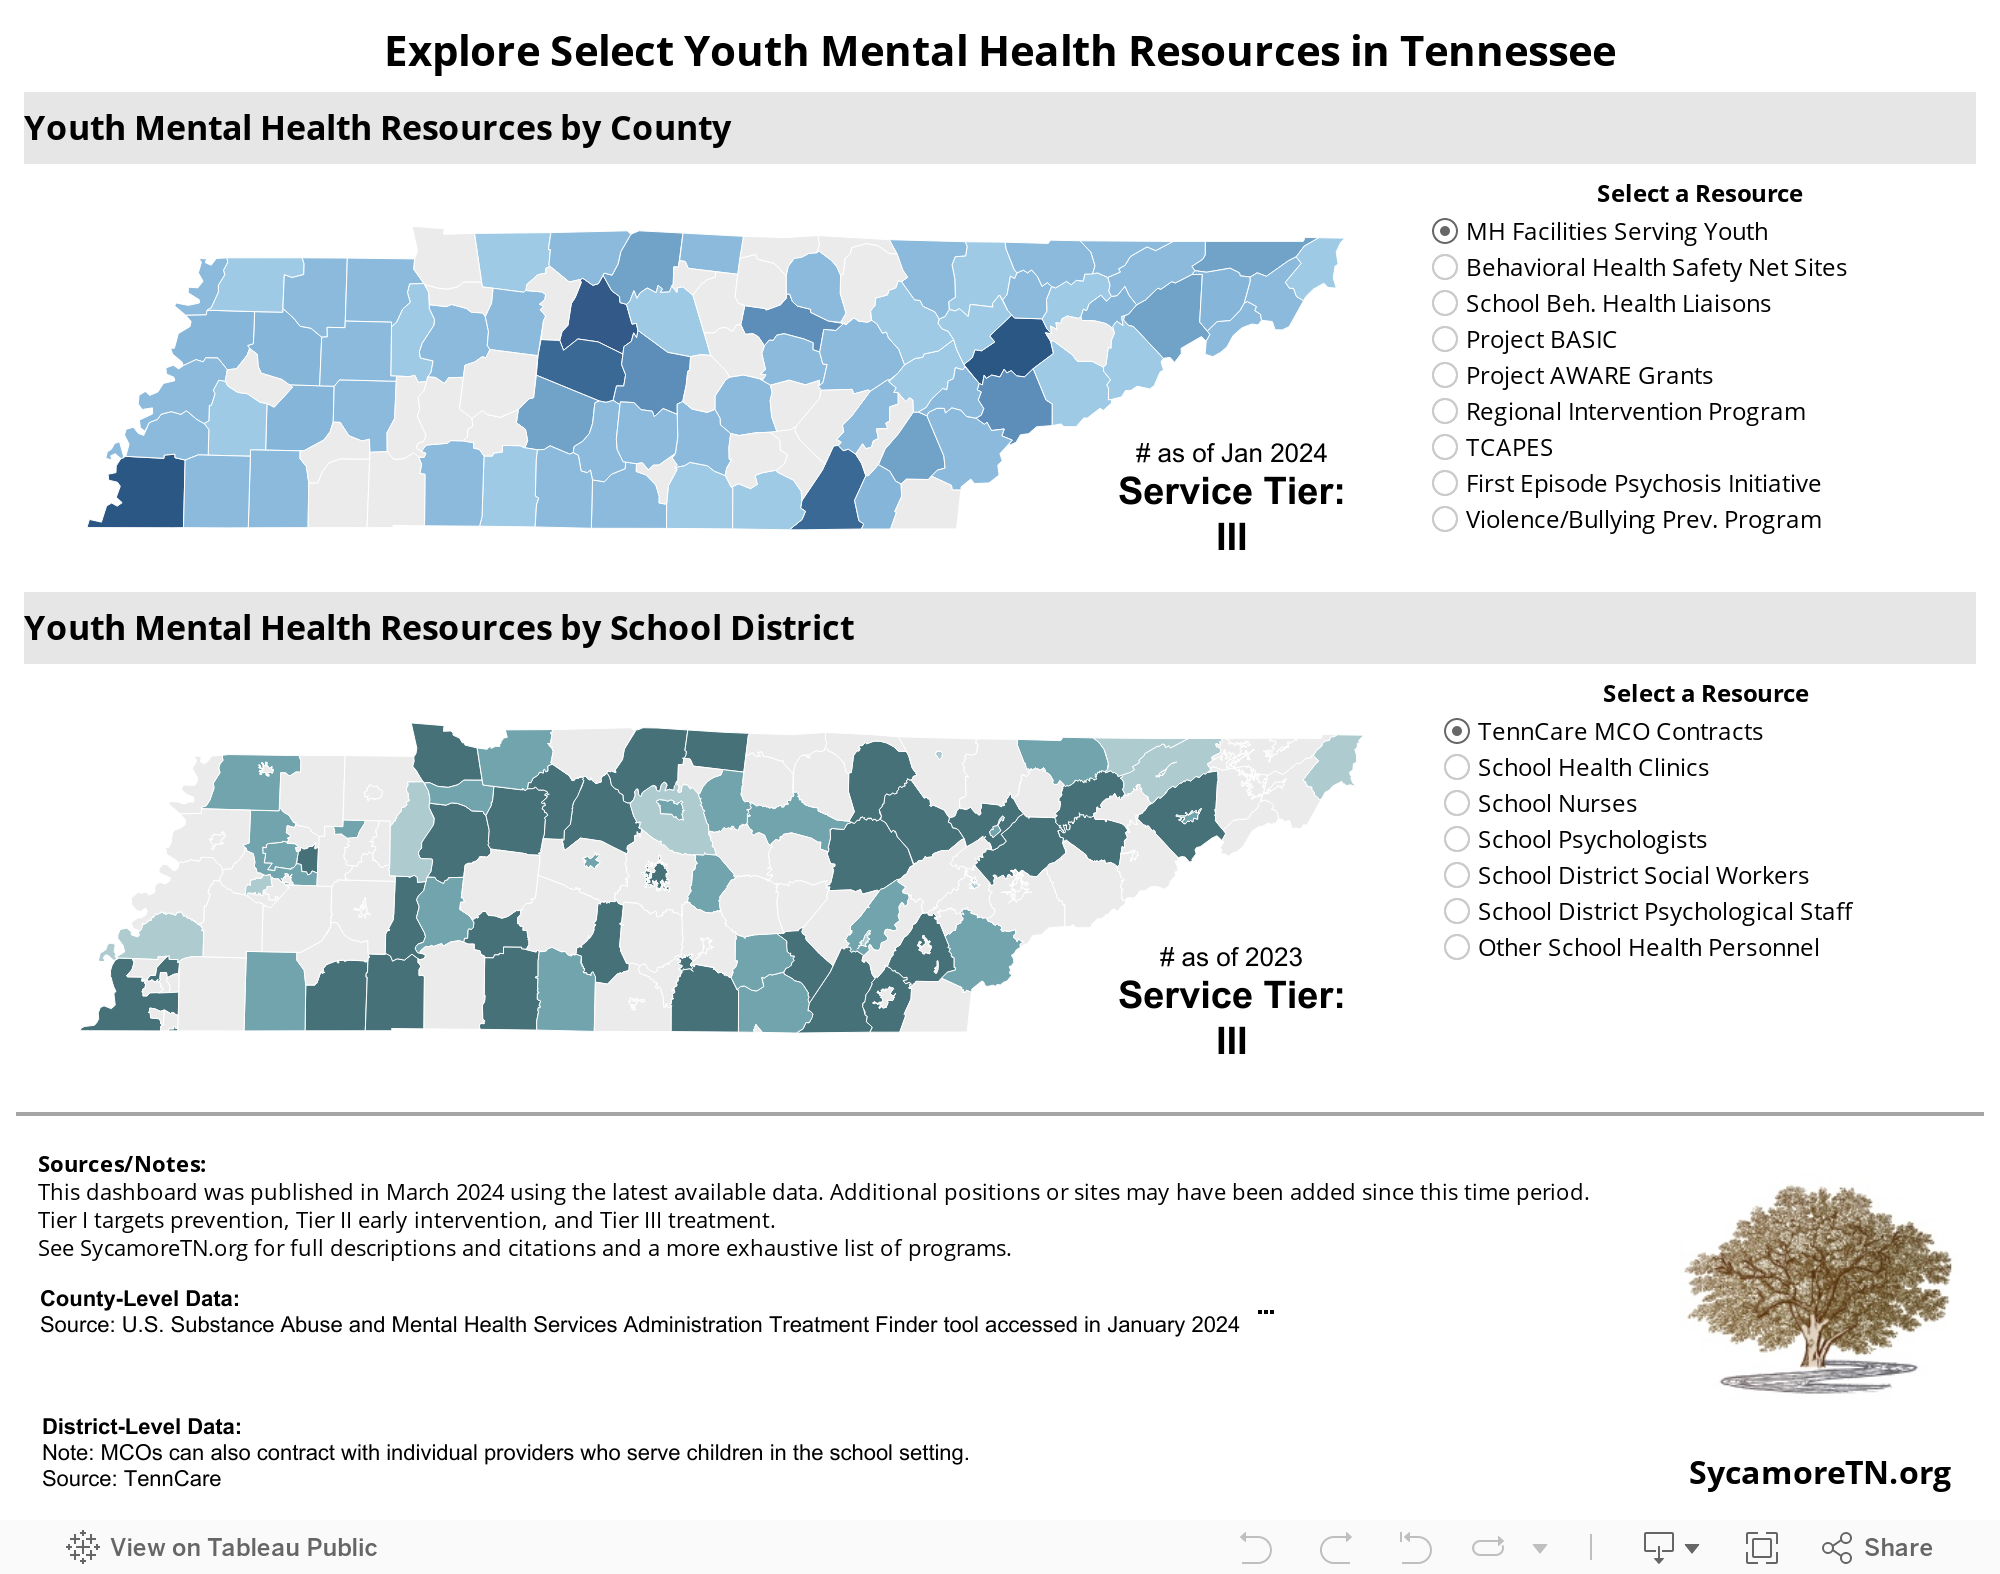 Explore Select Youth Mental Health Resources in Tennessee 